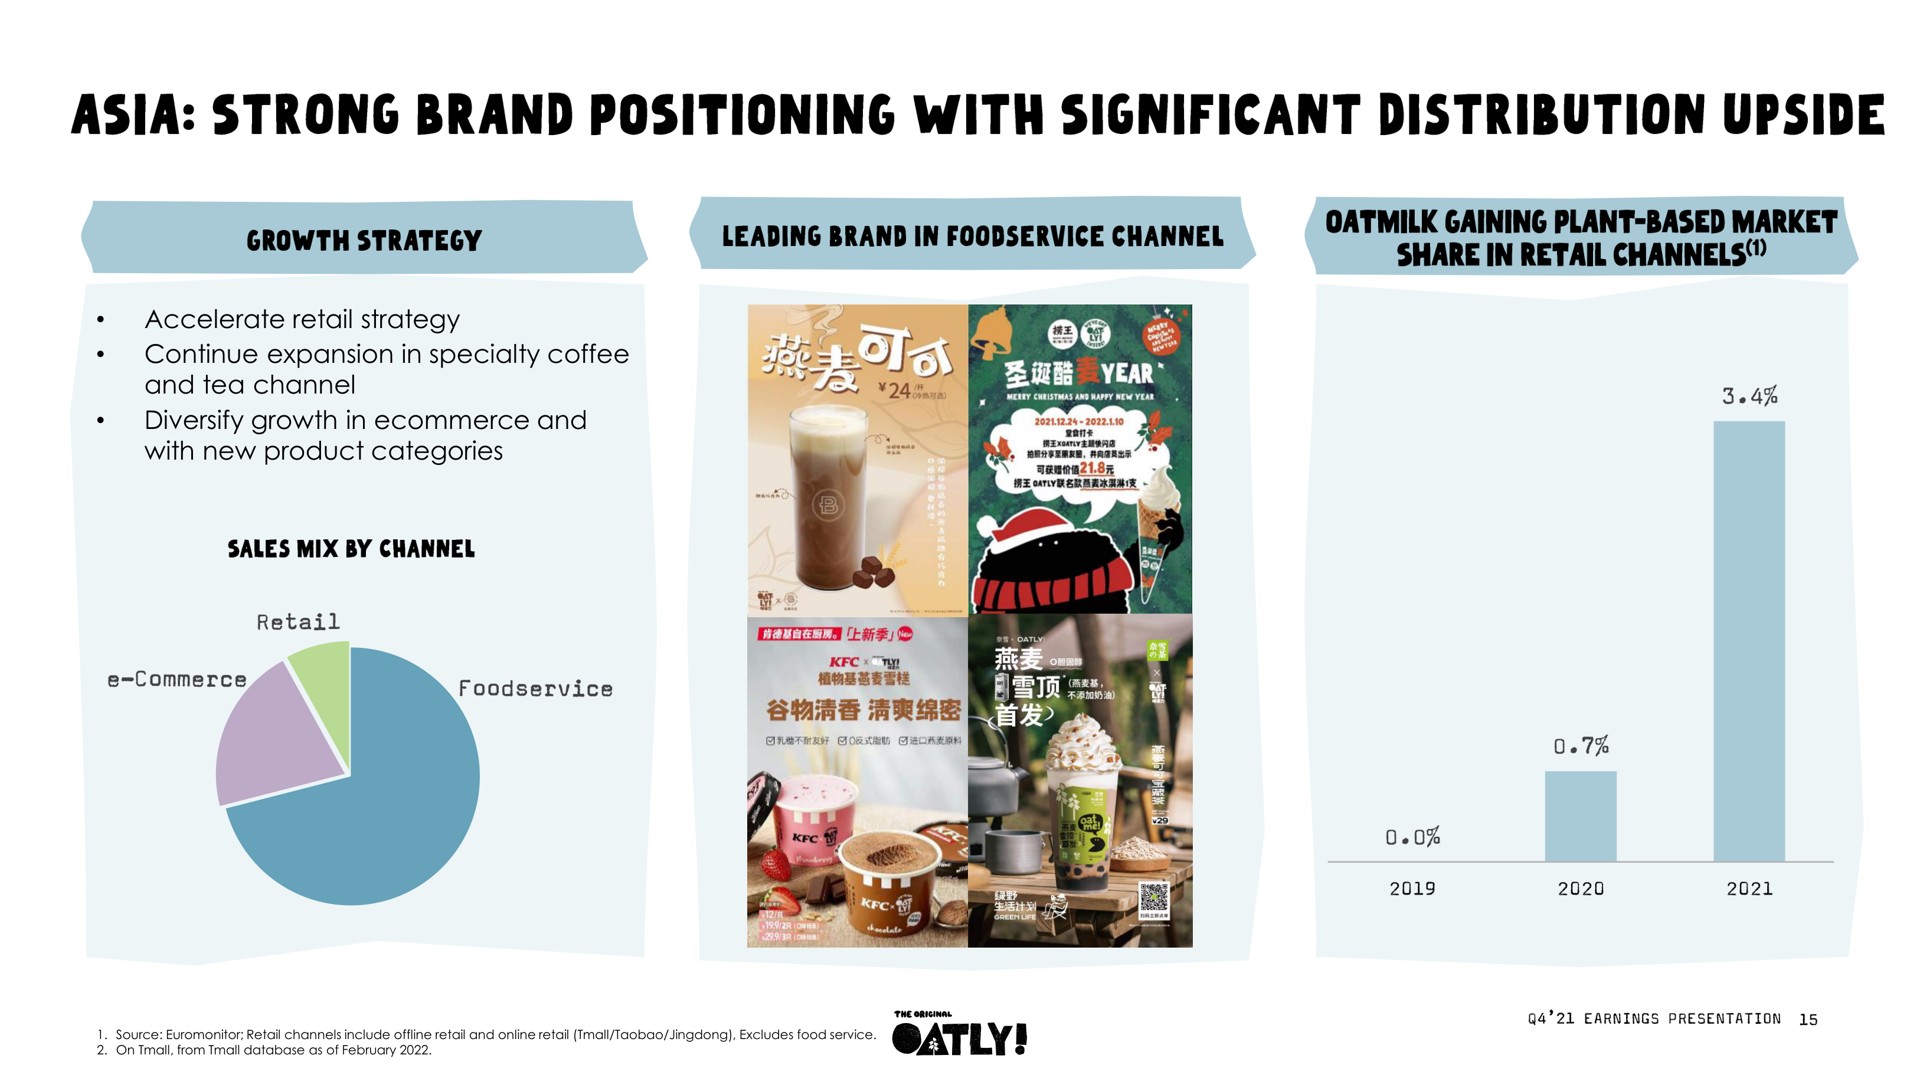 accelerate retail strategy continue expansion in specialty coffee and tea channel diversify growth in and with new product categories strong brand positioning significant distribution upside | Oatly